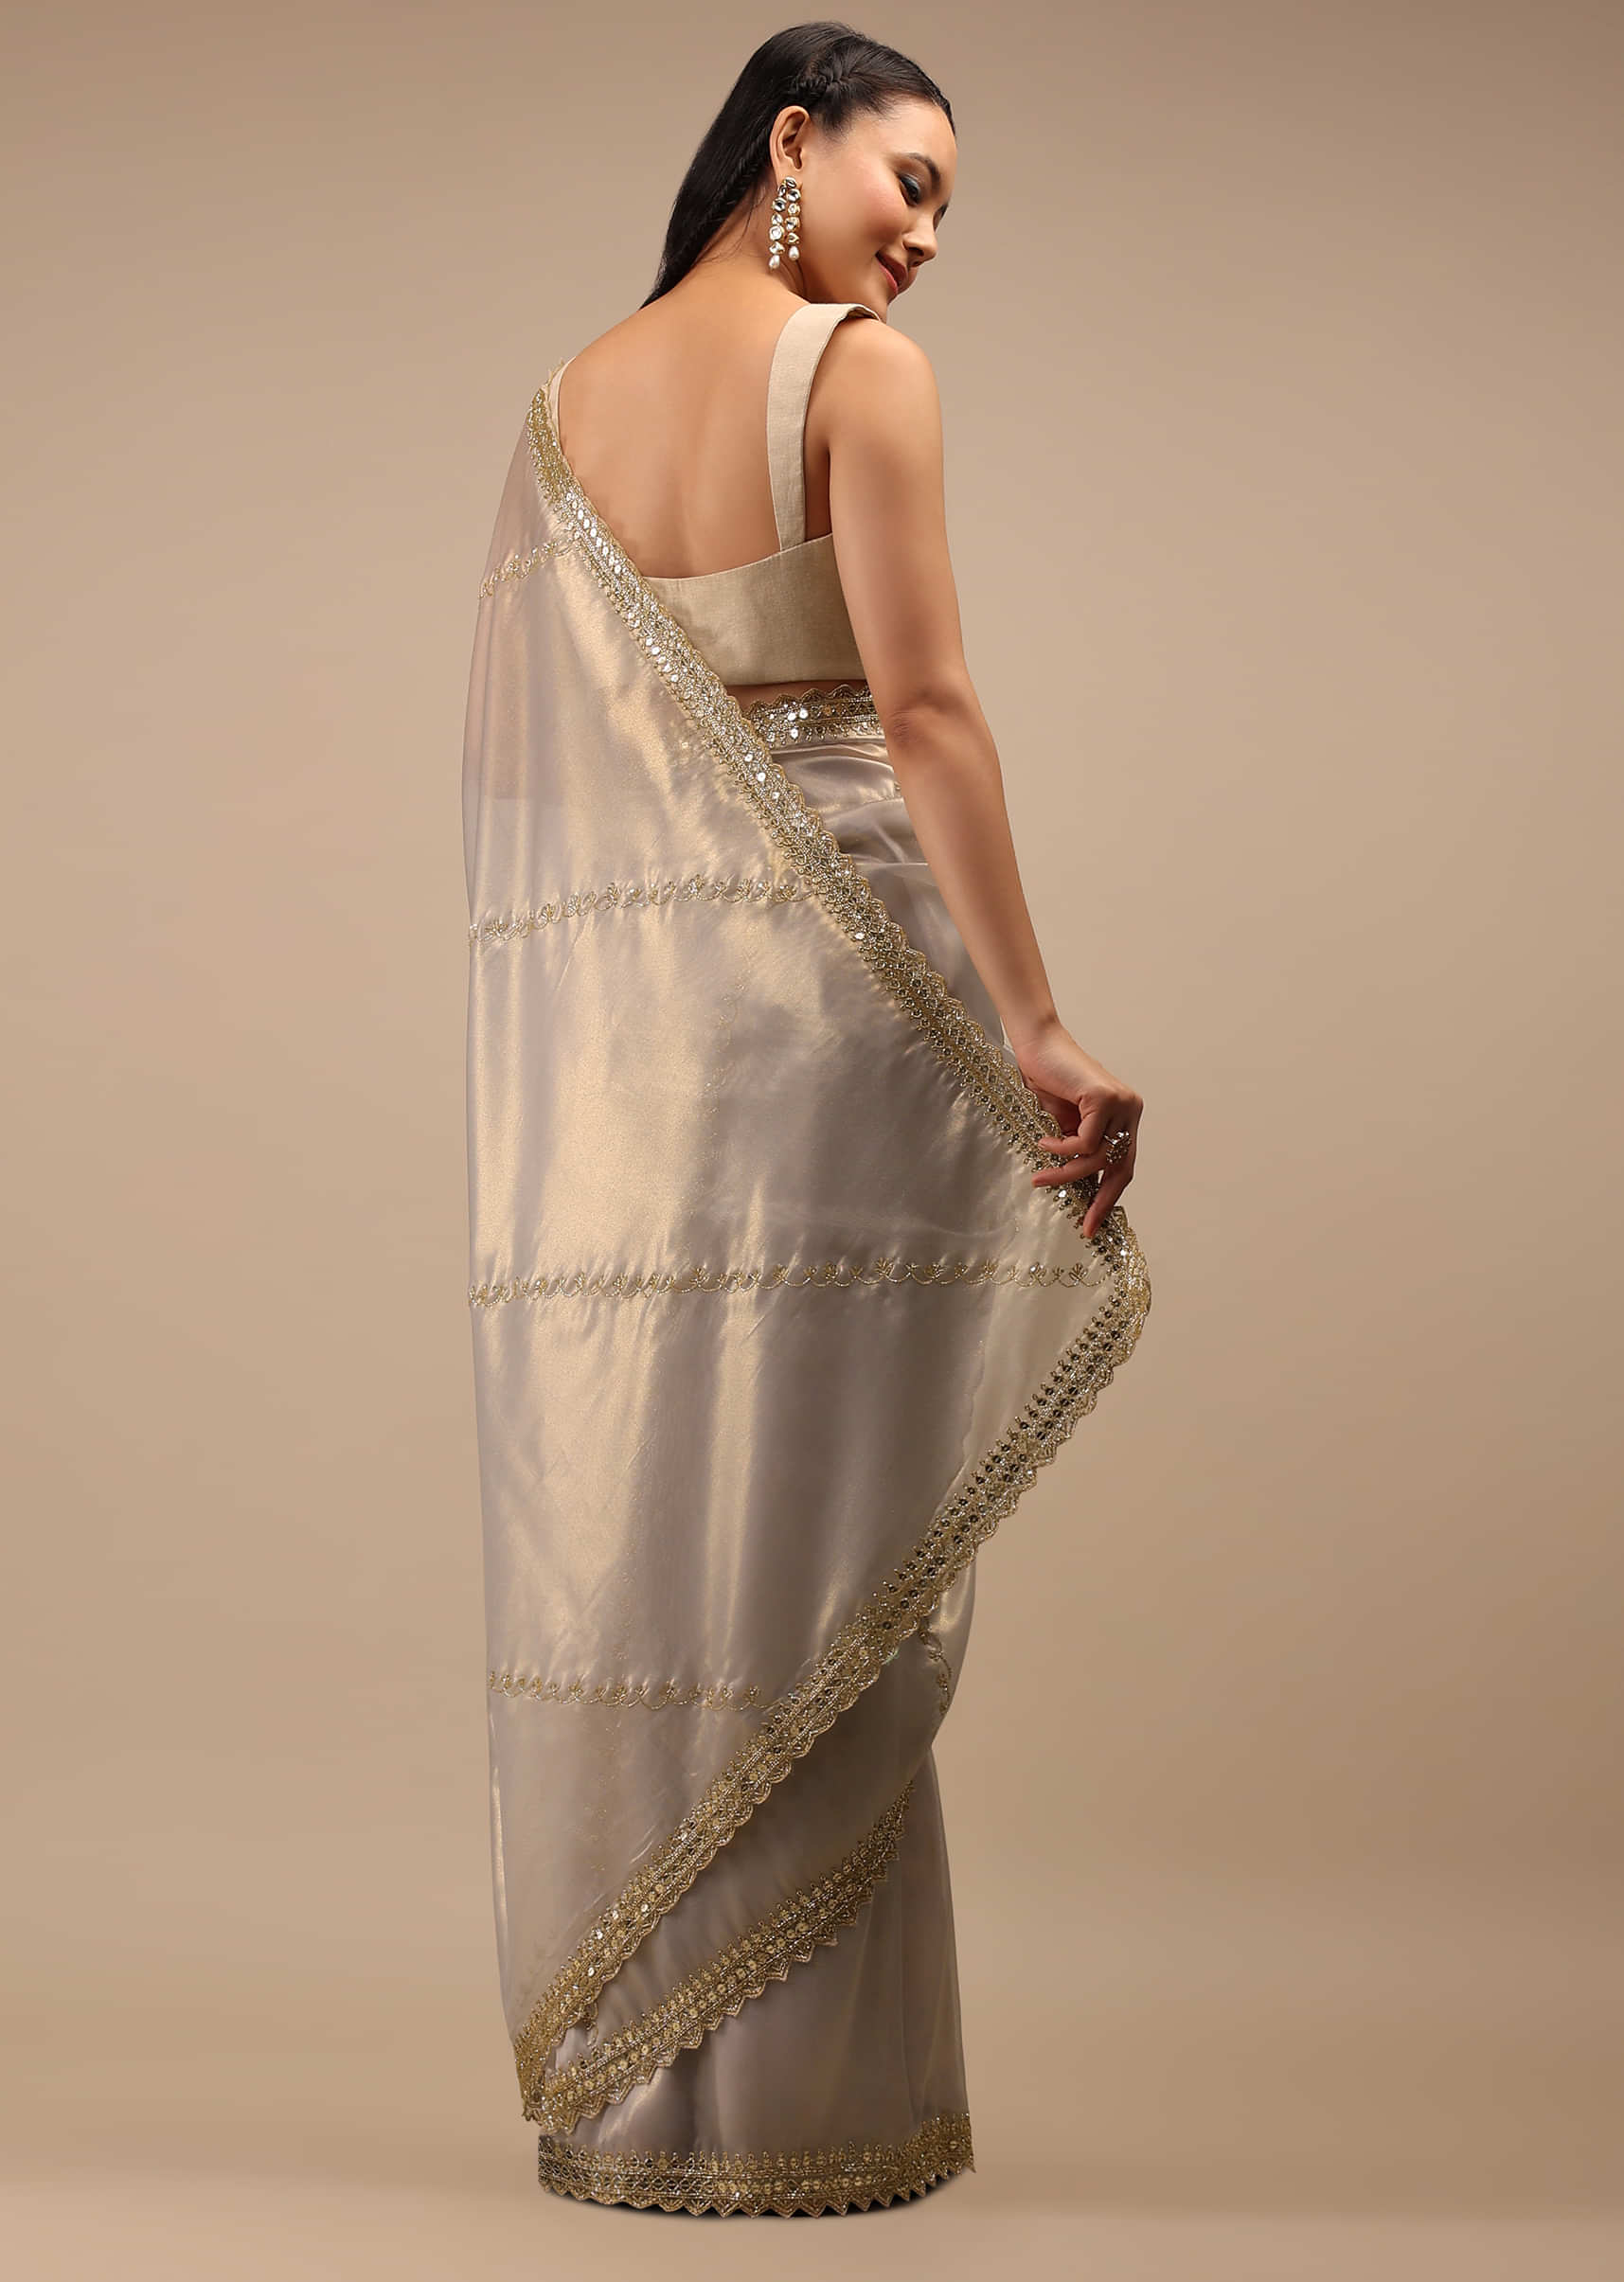 Lilac Grey Glass Tissue Saree In Golden Cut Dana Embroidery Buttis, Cutwork Detailing On The Border With Cut Dana Embroidery